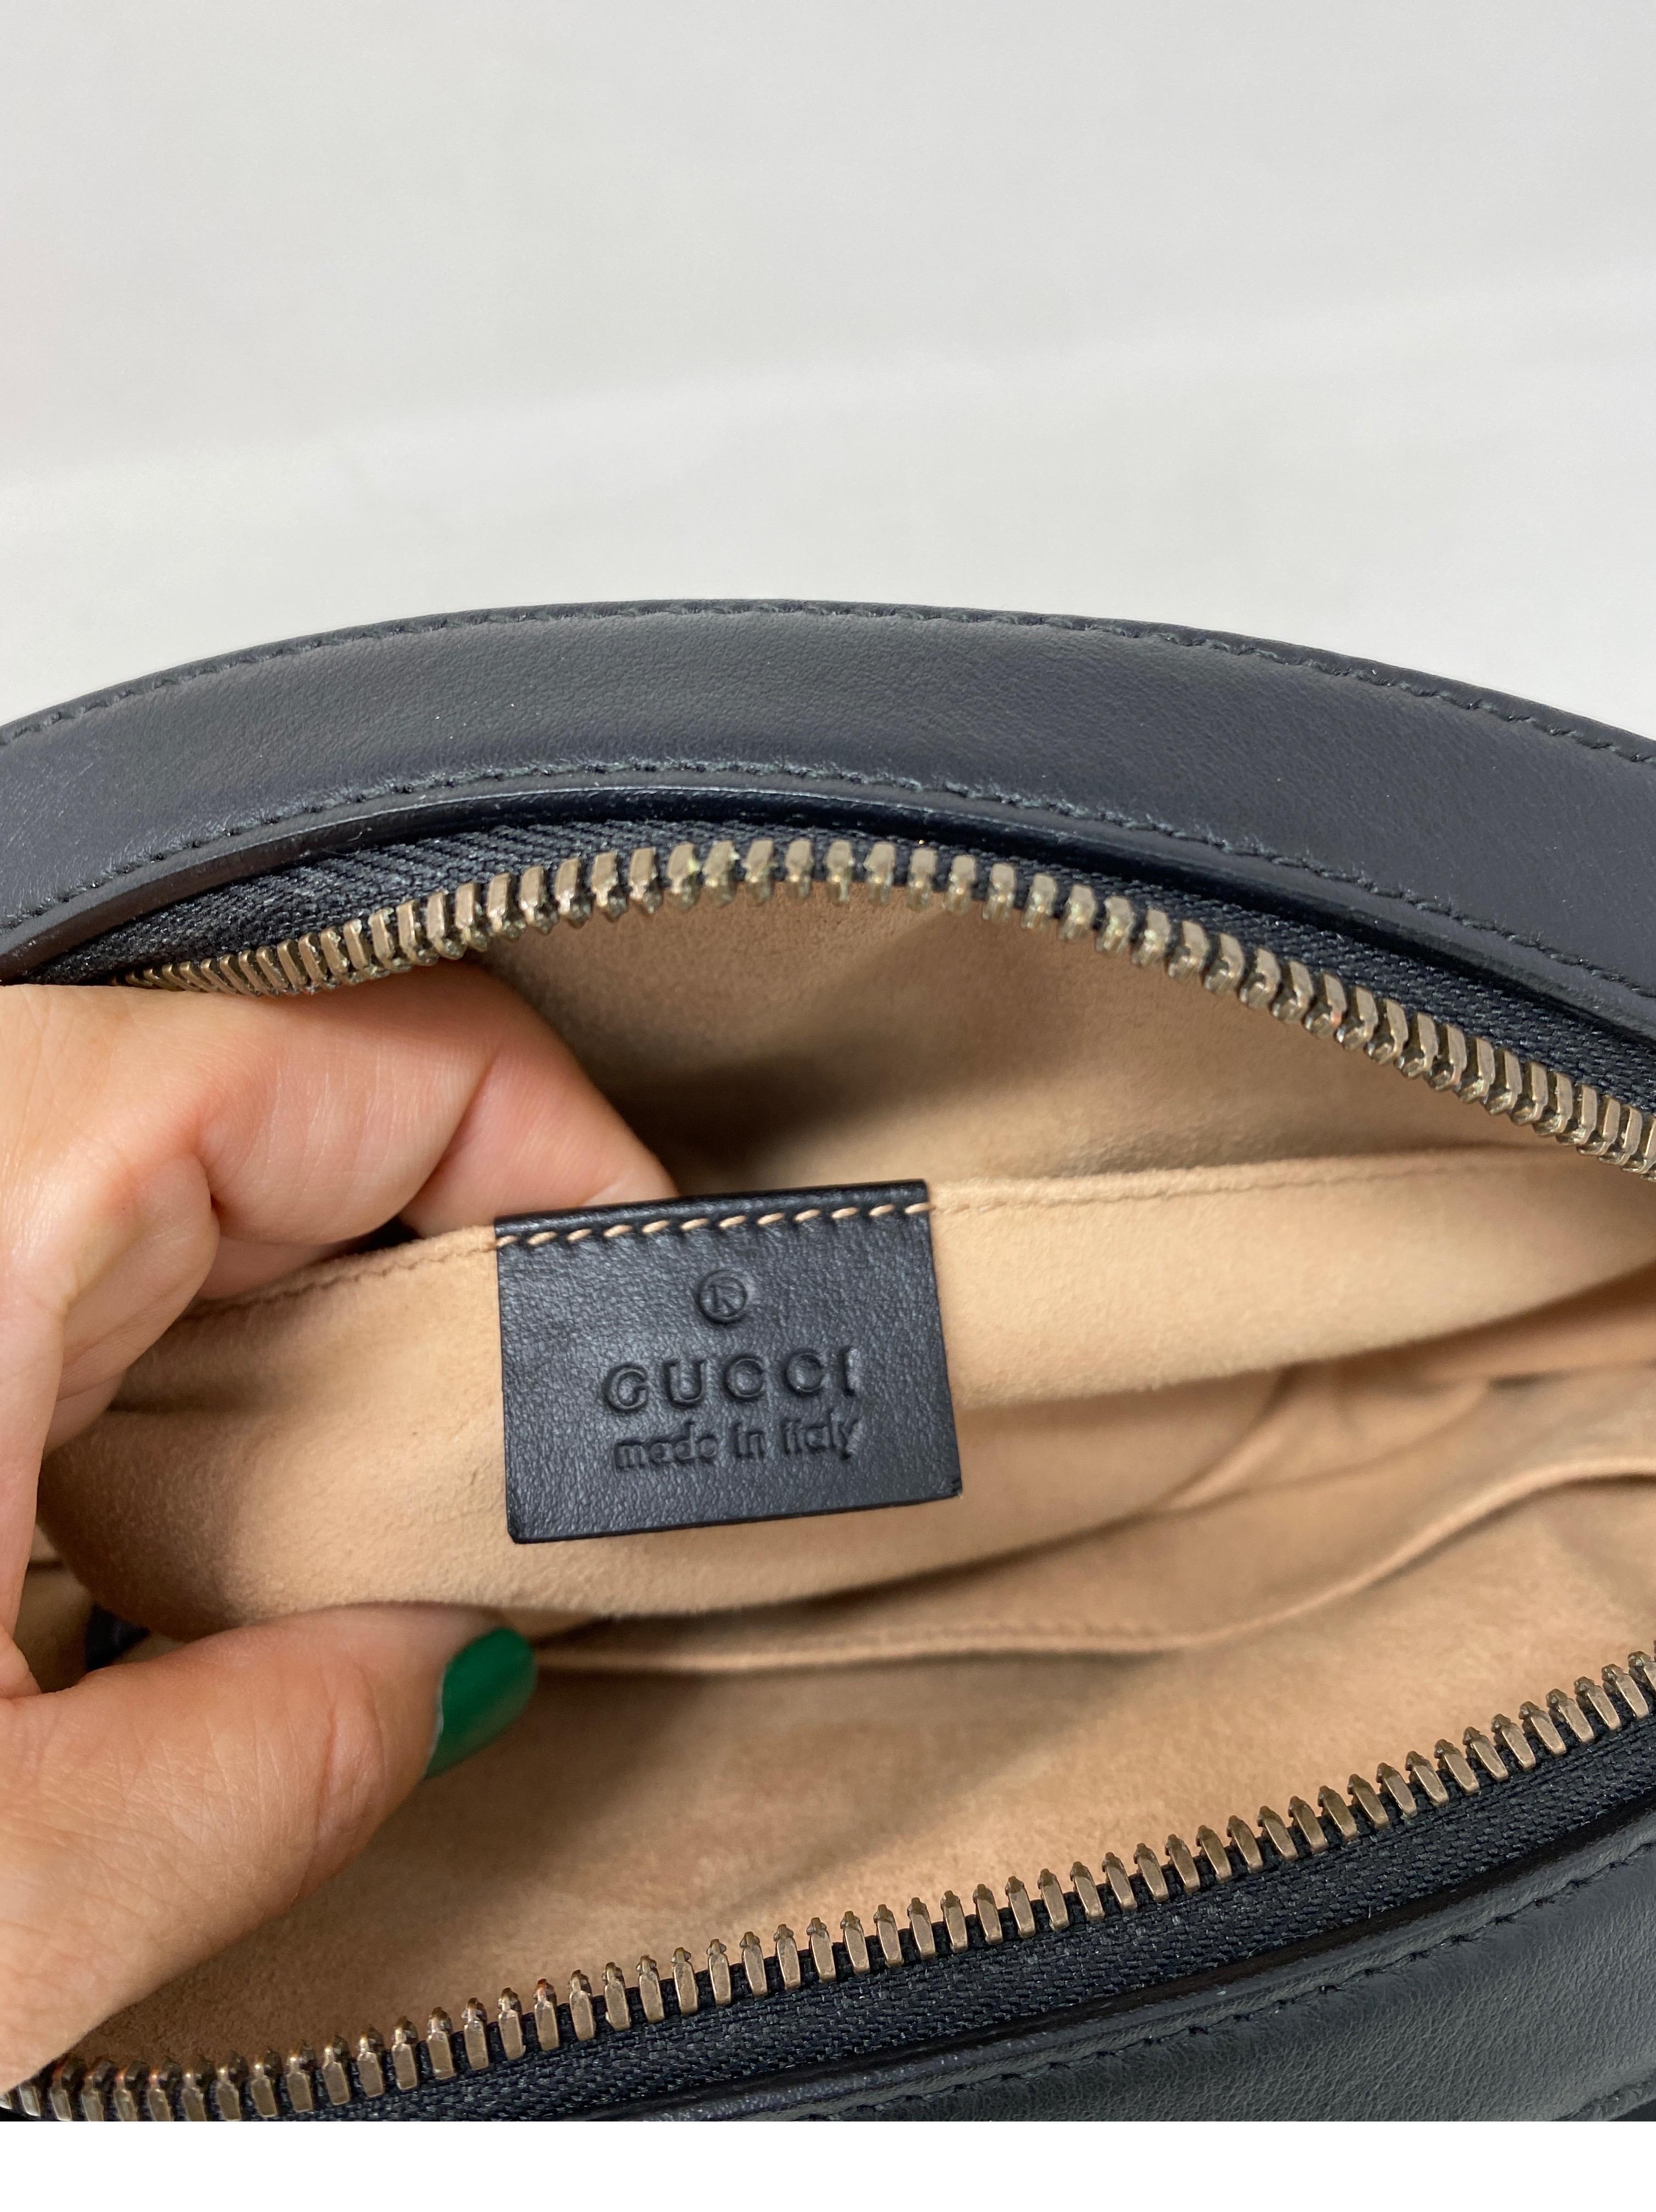 Gucci Insects Bum Bag  2